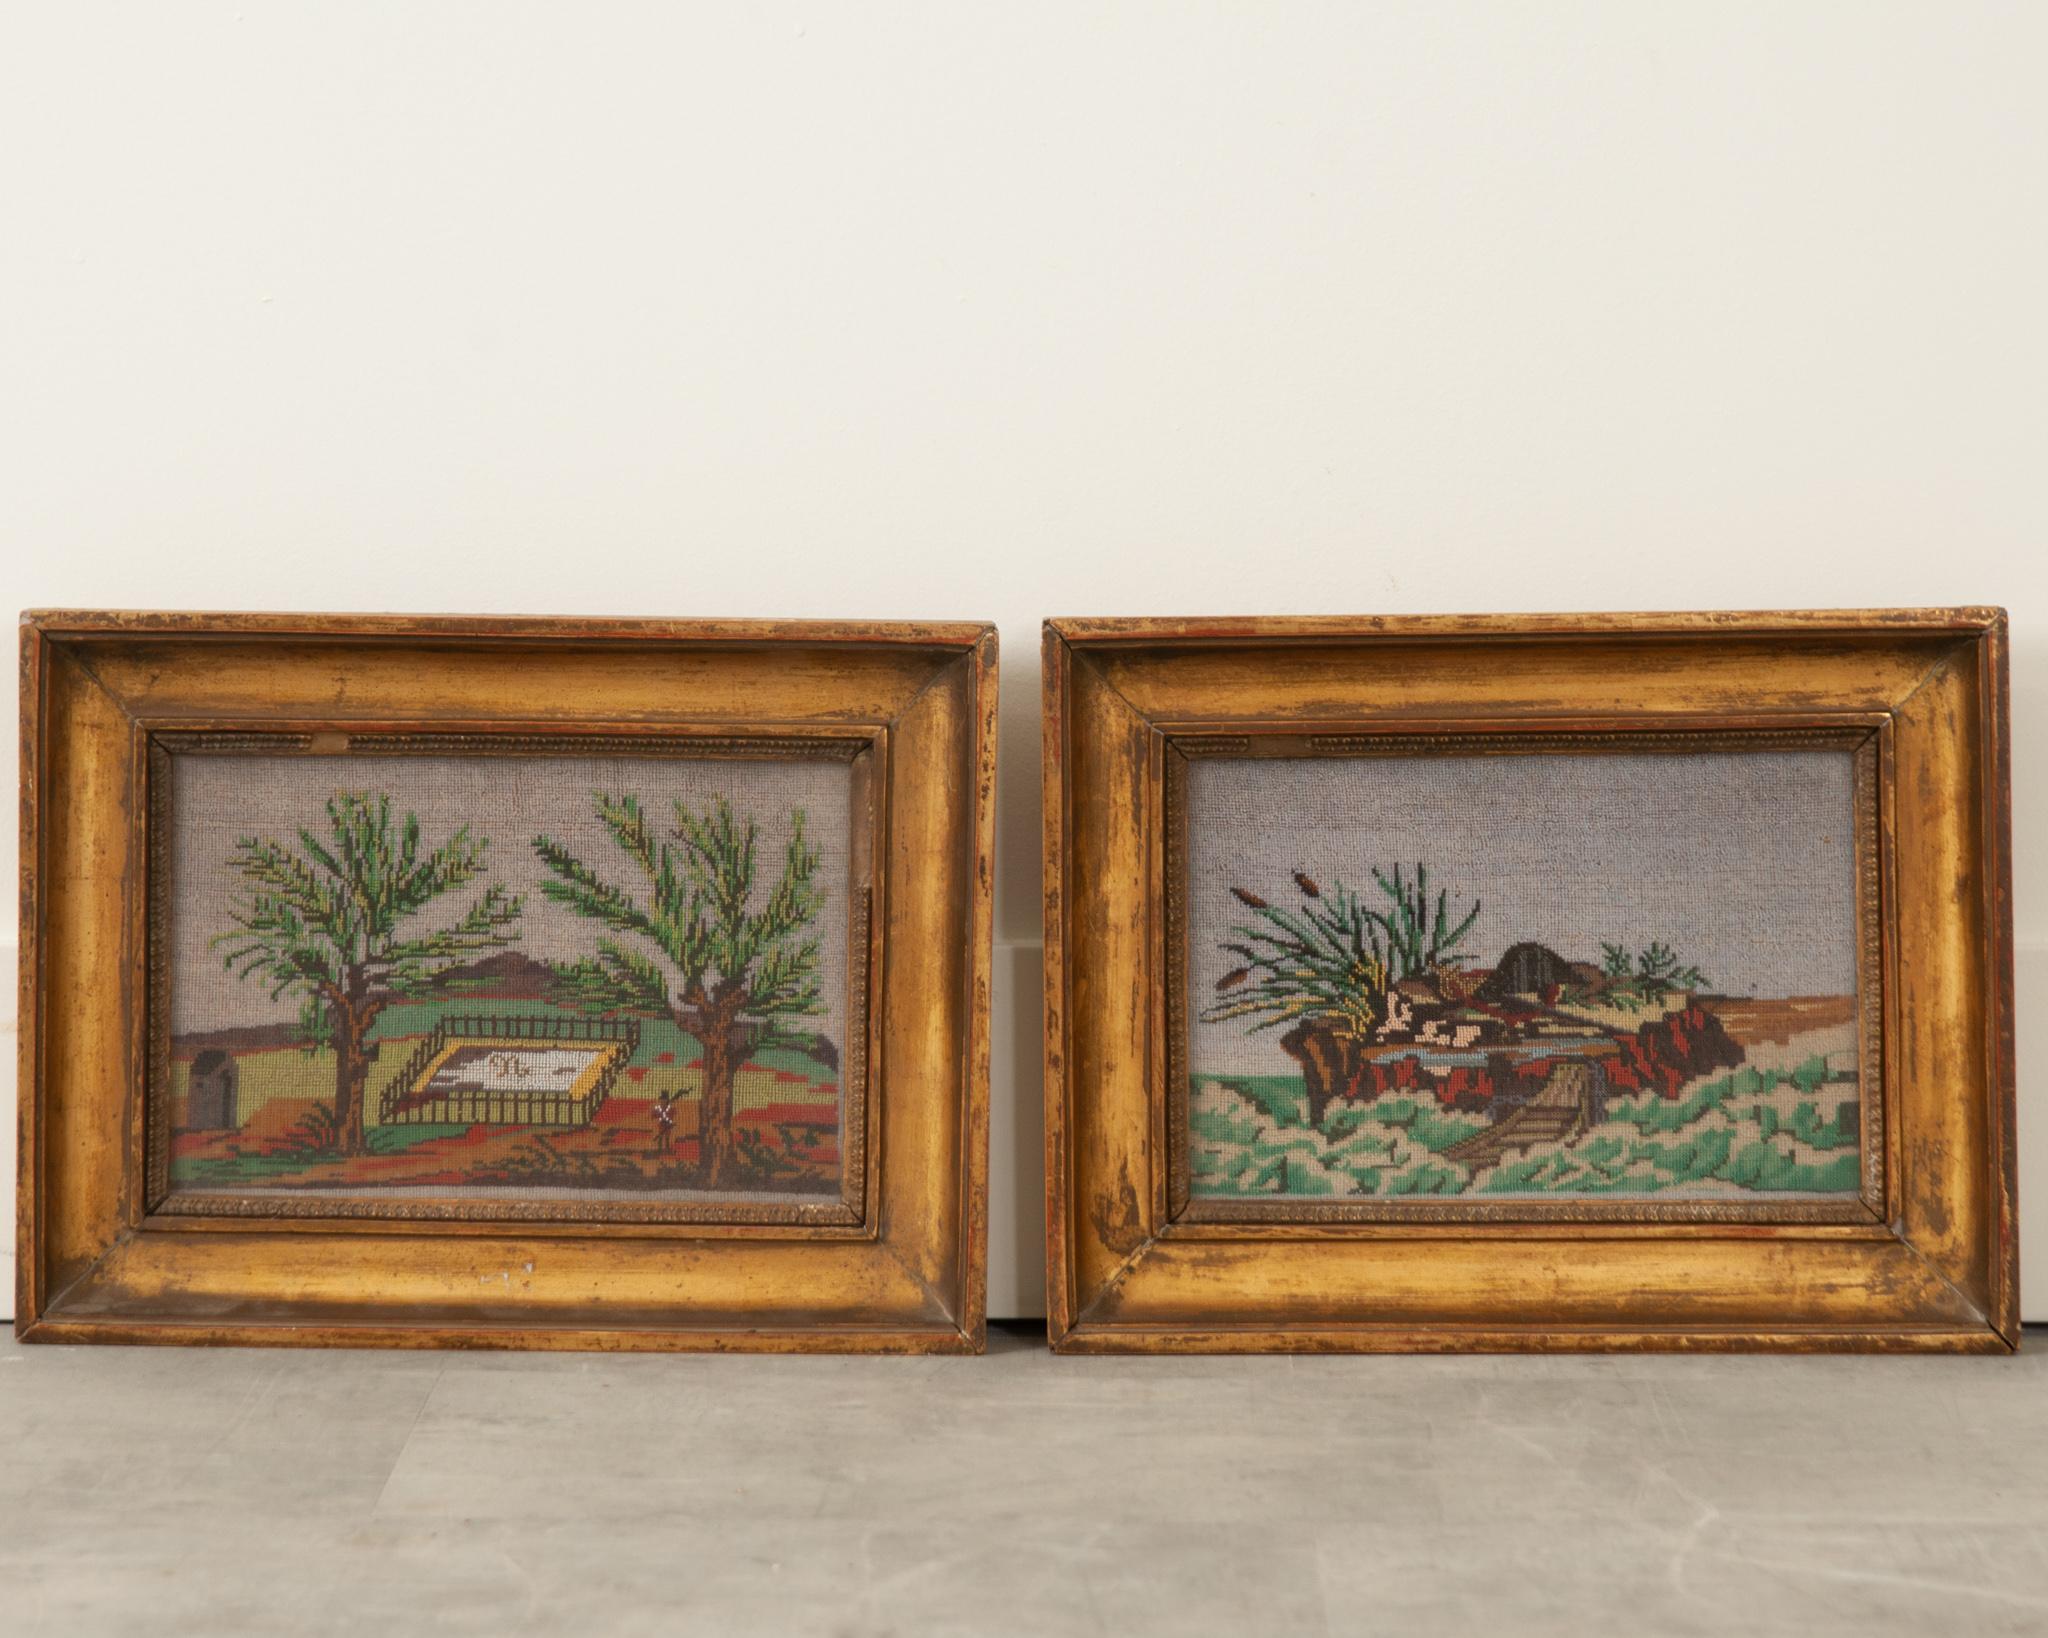 A pair of beautiful fabric & glass beadwork framed memorial landscape scenes. Carved giltwood framed with a wonderful patina. The beadwork is in excellent condition. Both depict burial sites; one watched over by a soldier, one on the coast with a